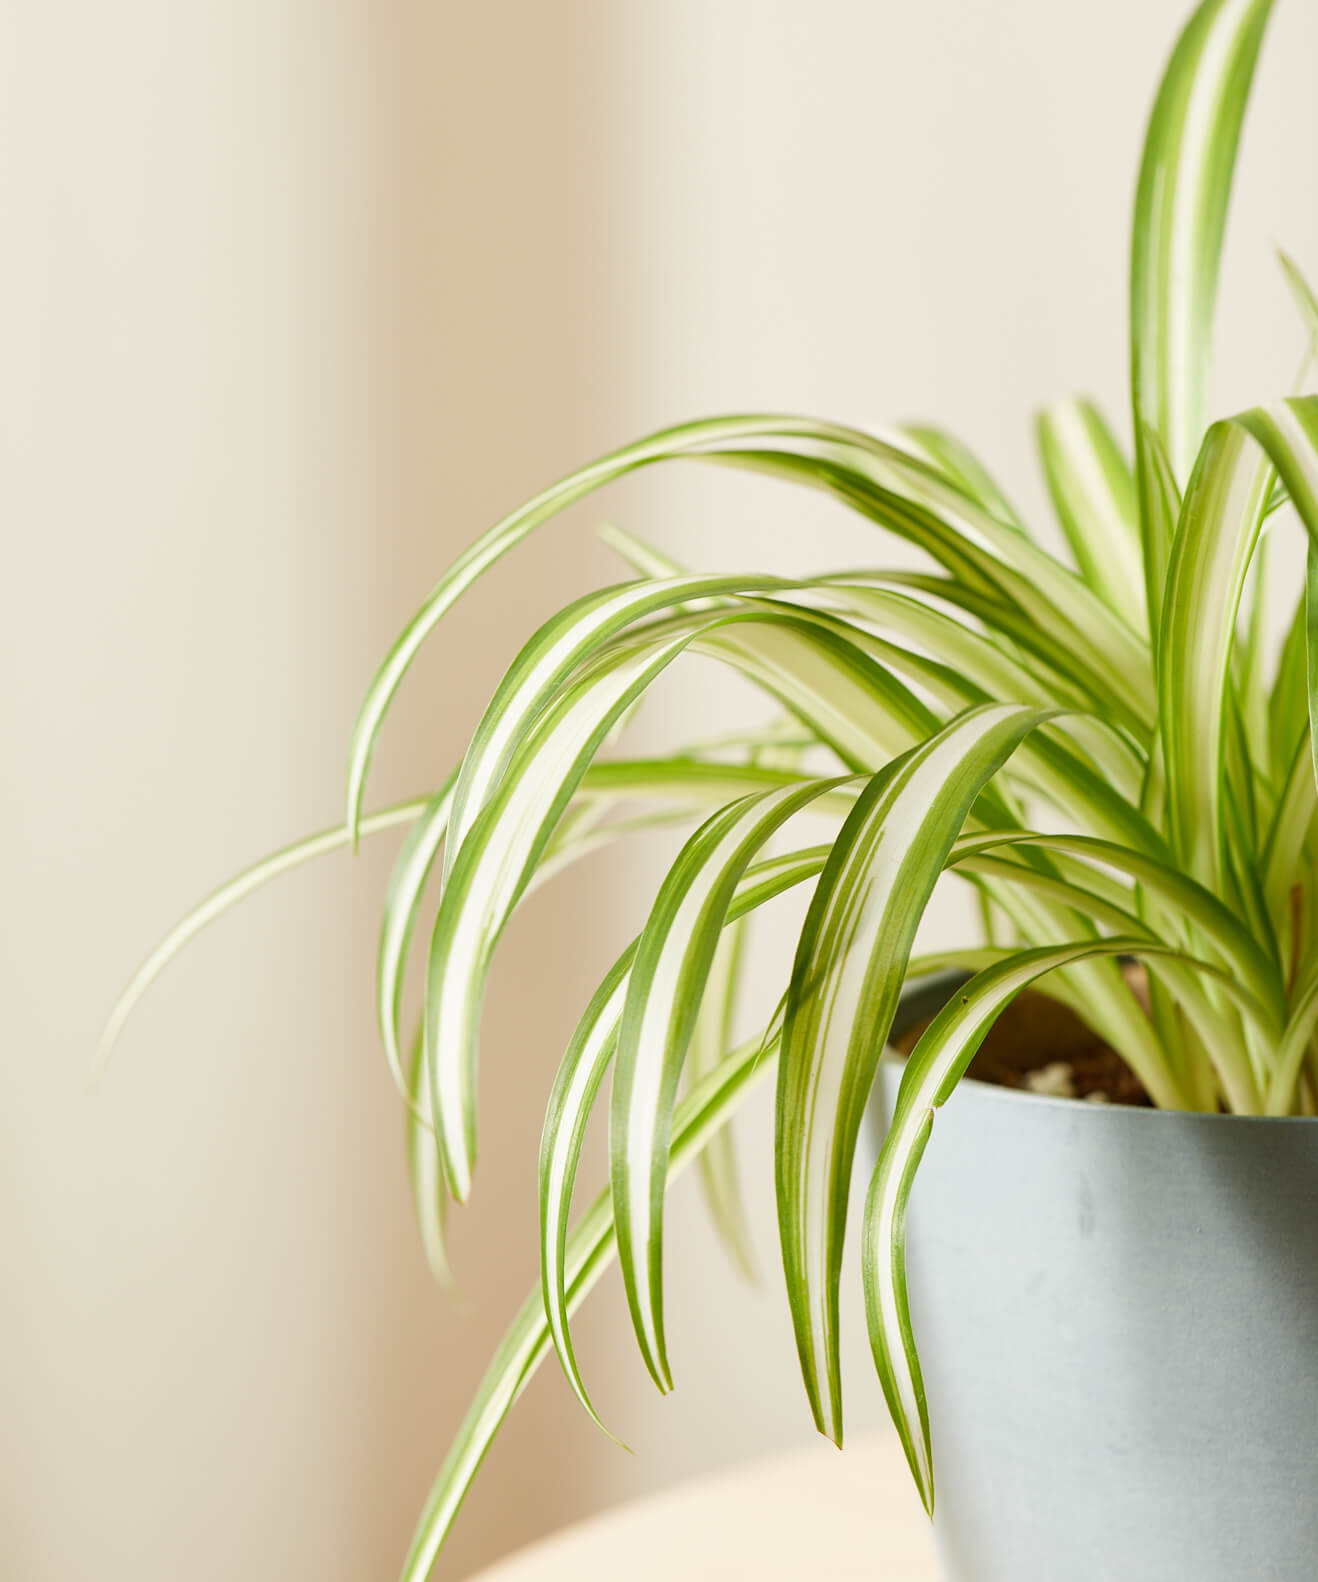 Spider Plant Care Guide 2023: Watering, Soil, Light, Propagation